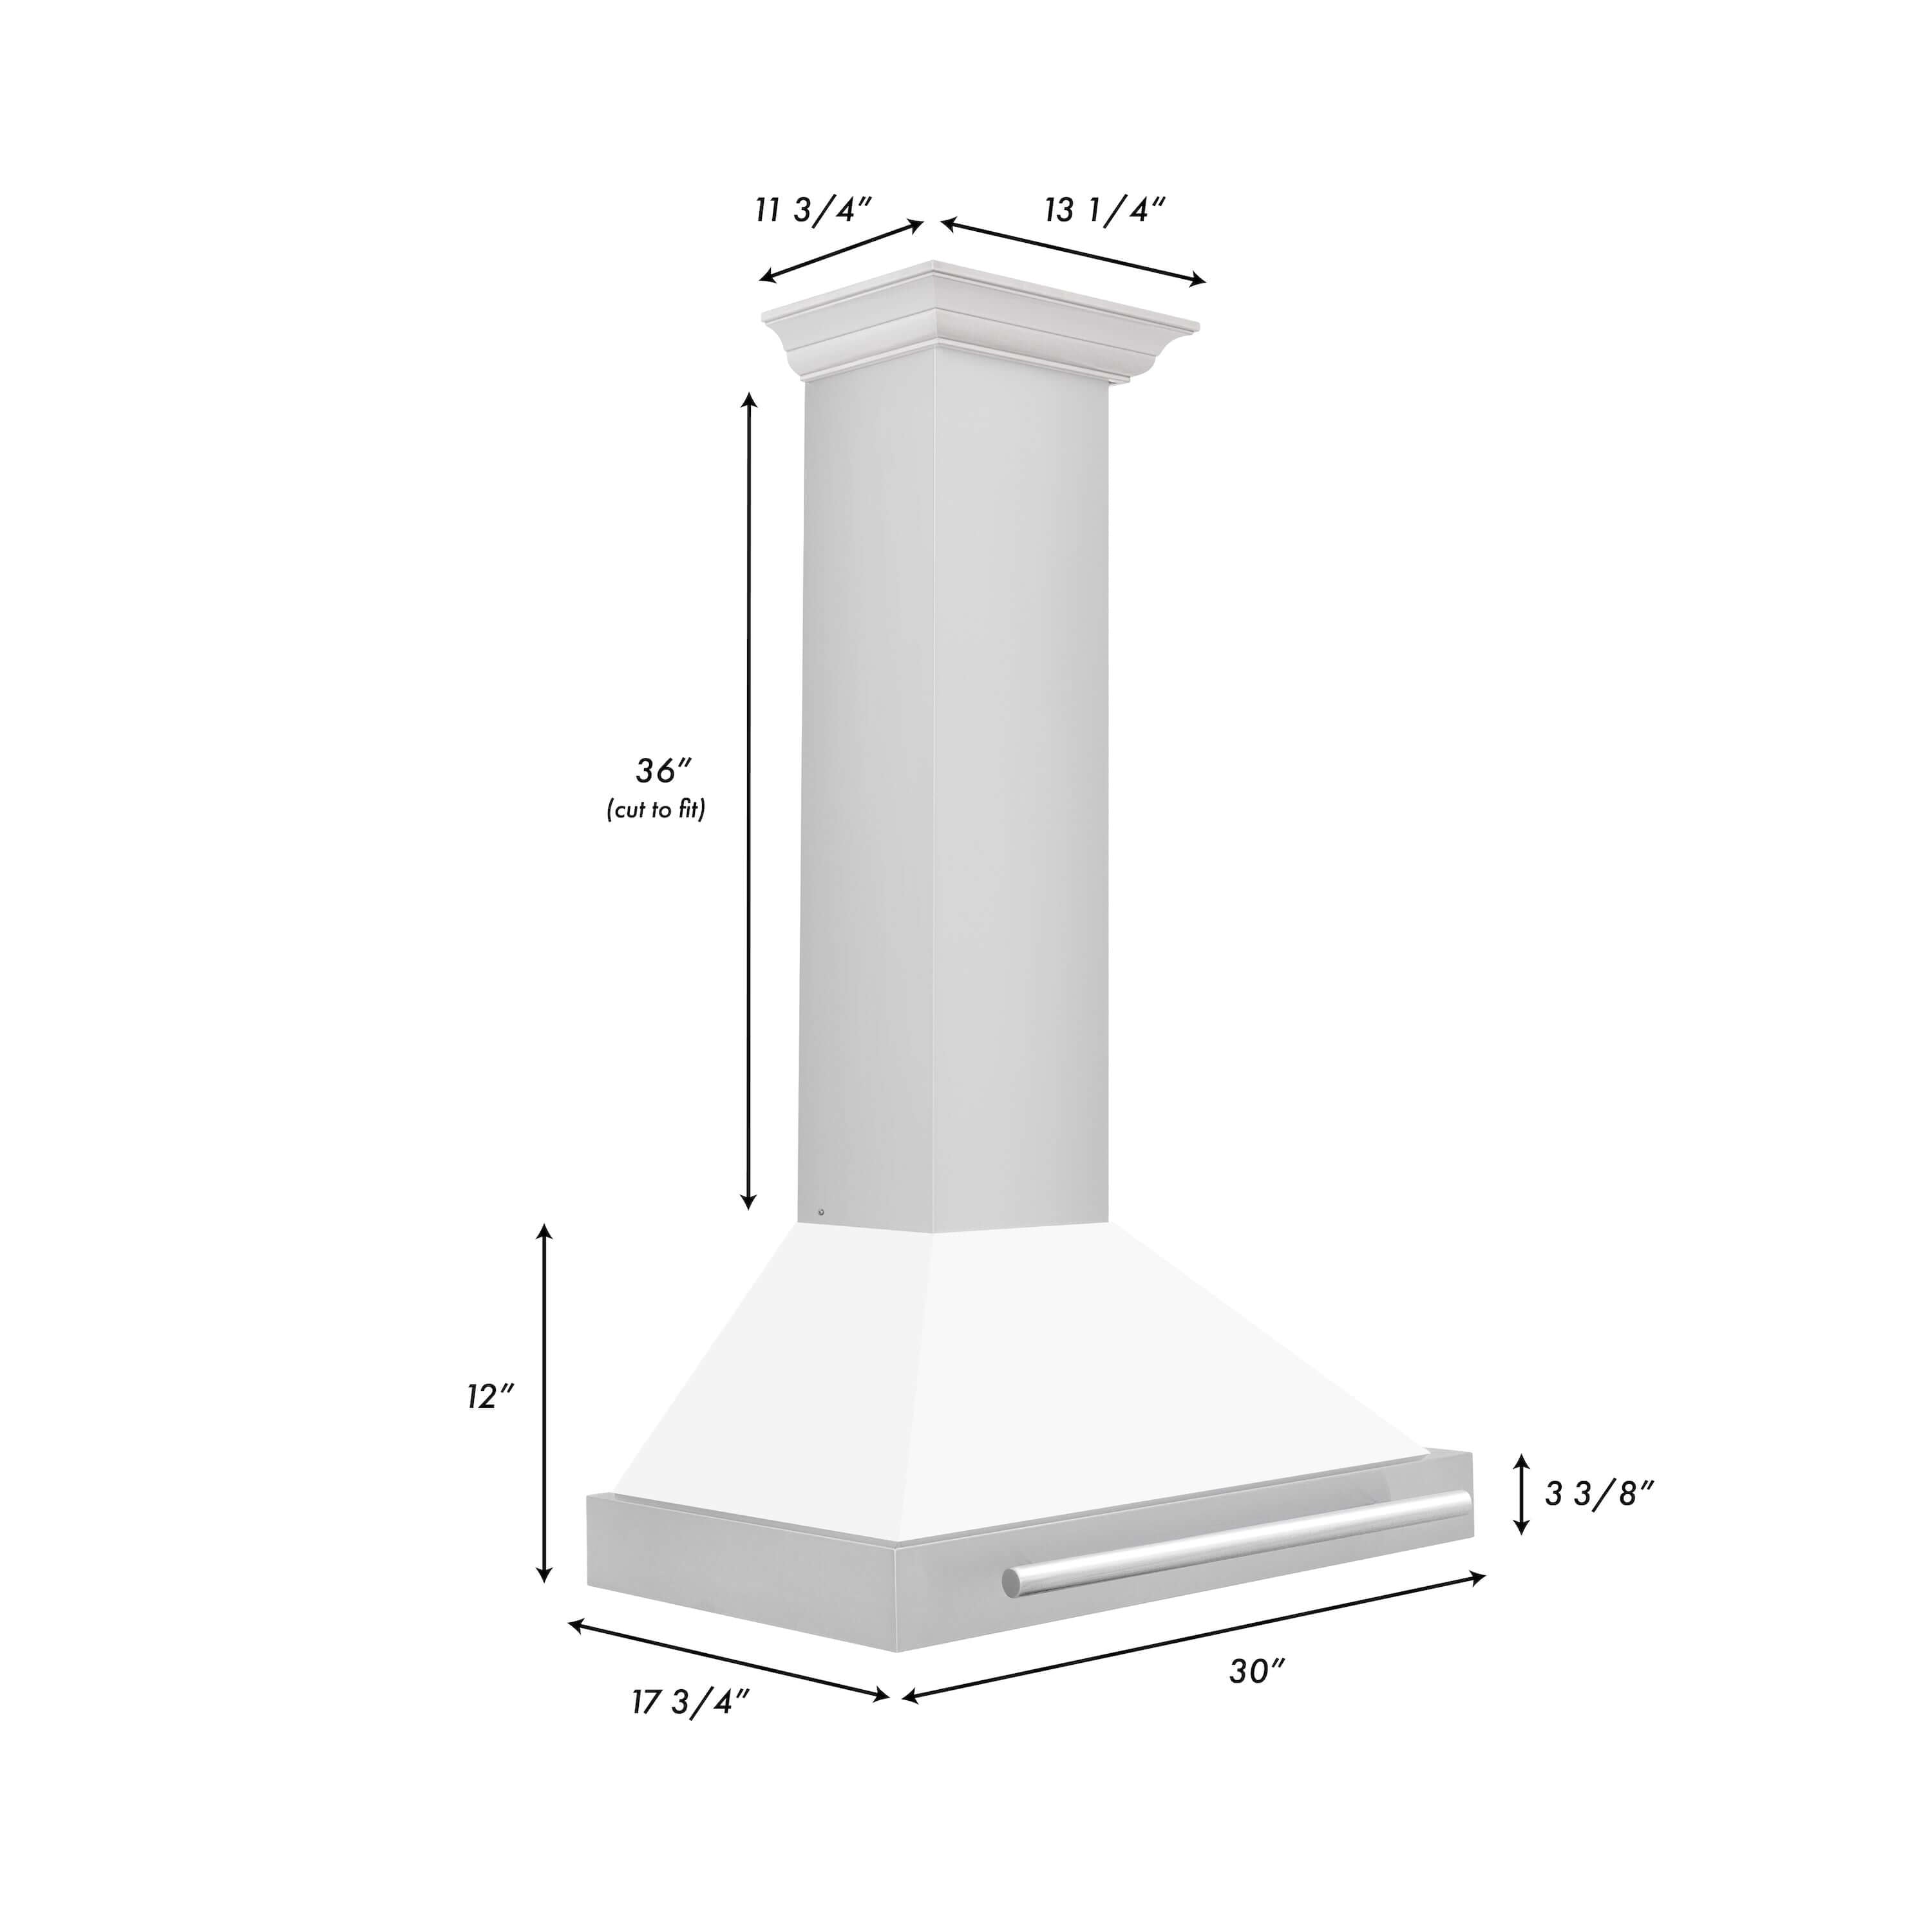 ZLINE 30 in. Stainless Steel Range Hood with Stainless Steel Handle and Colored Shell Options (KB4STX-30) dimensional diagram and measurements.